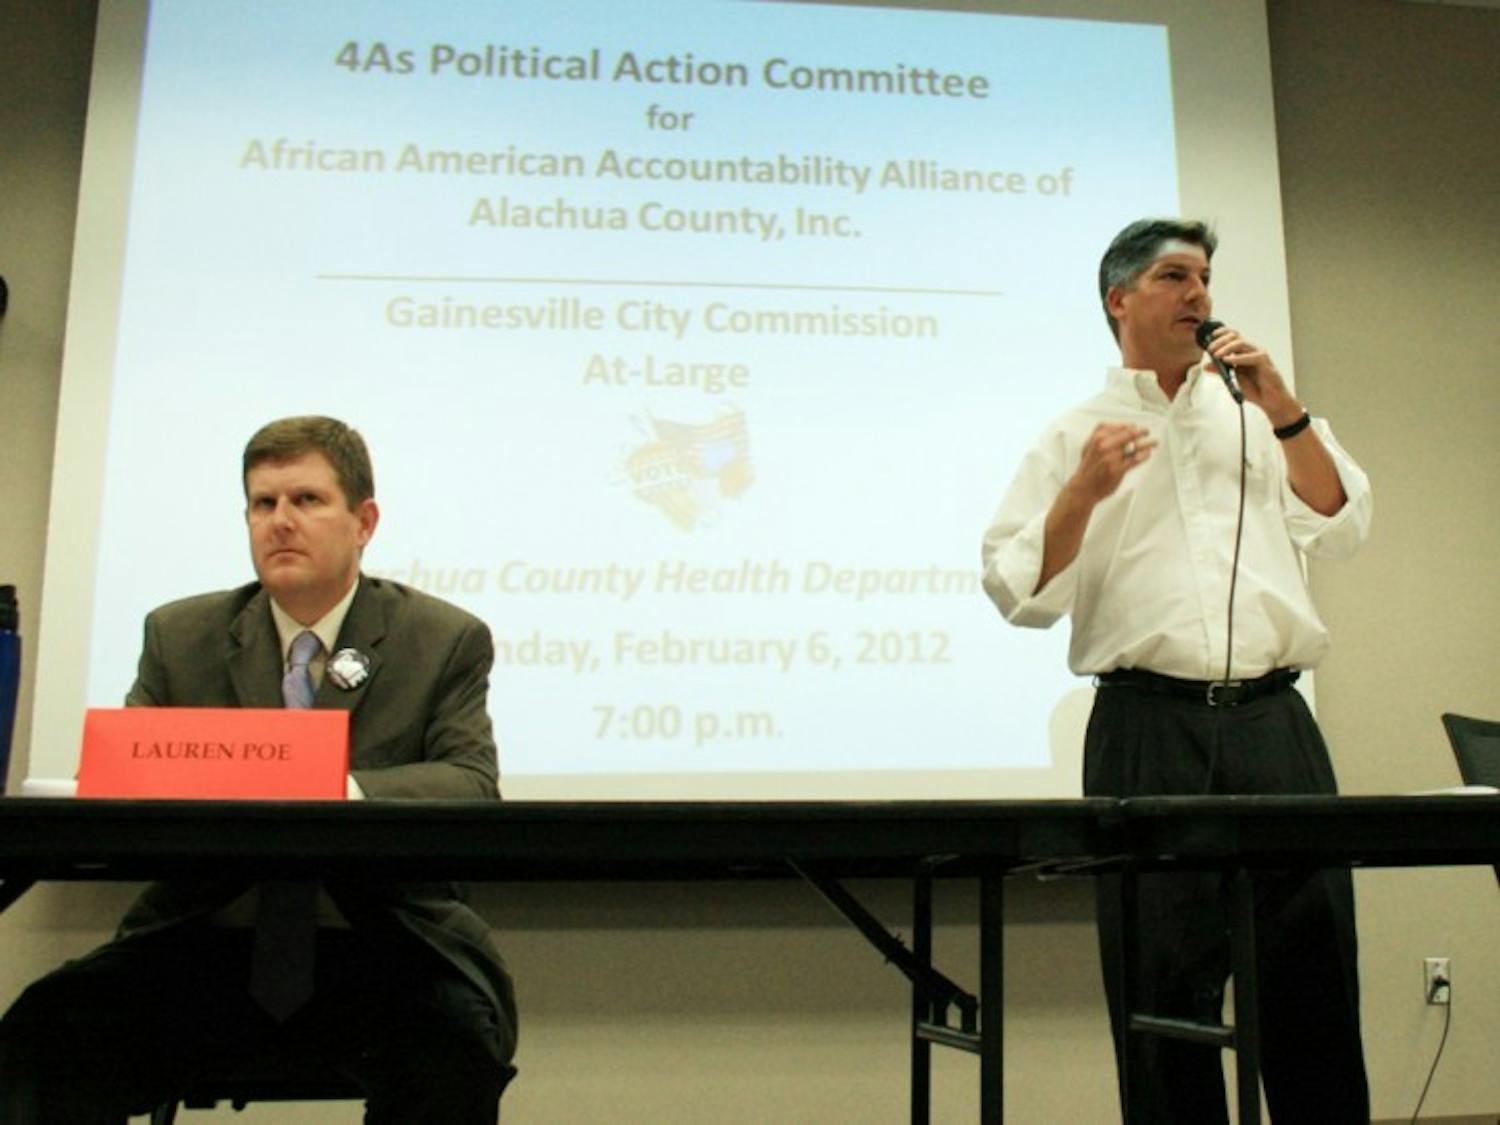 Lauren Poe and Nathan Skop, Gainesville City Commission at-large 1 candidates, answer questions posed by the African American Accountability Alliance of Alachua County at the Alachua County Health Department on Monday night.